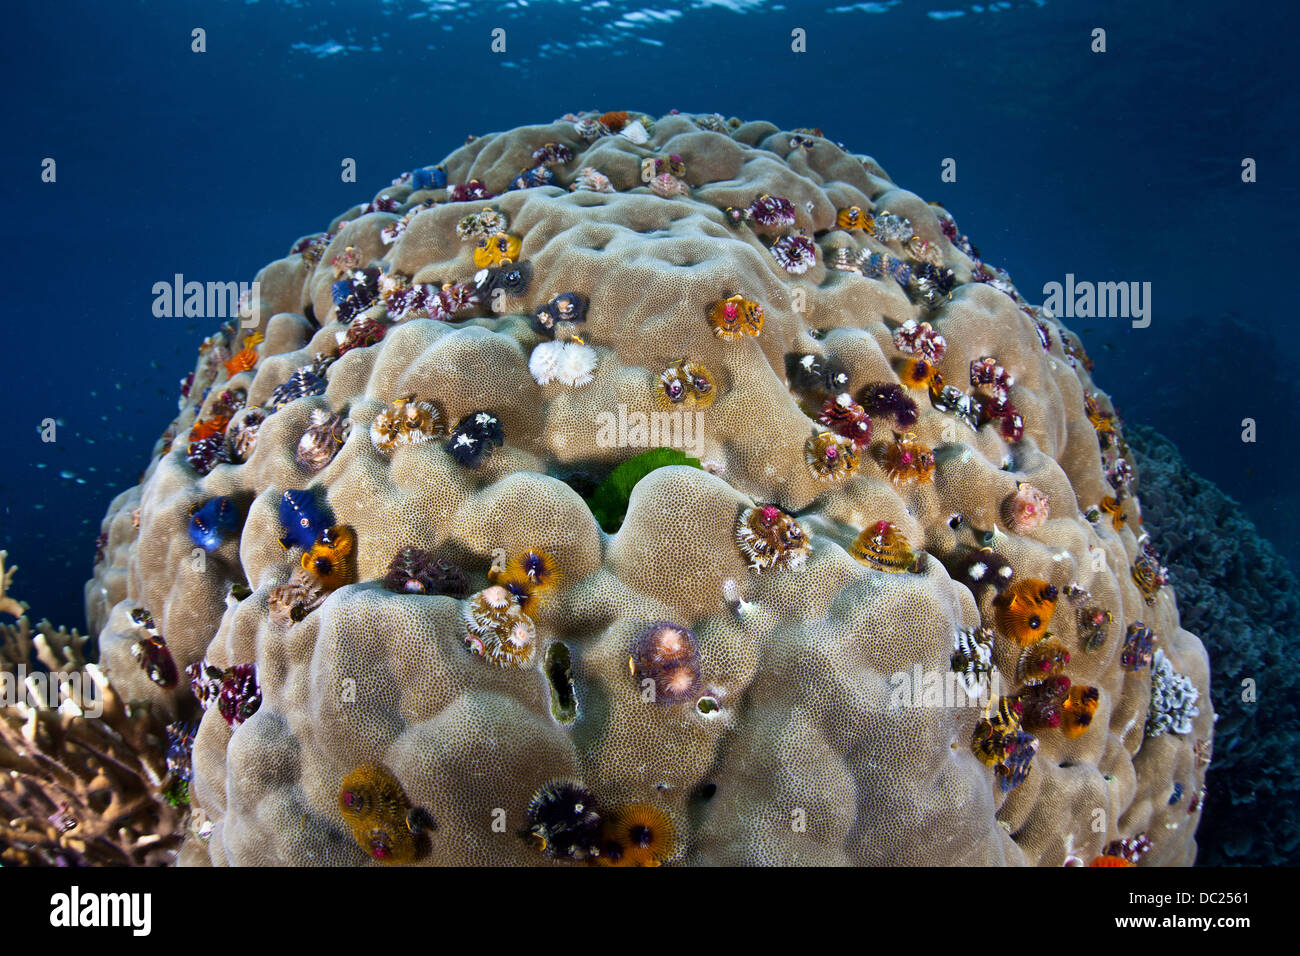 Christmas Tree Worms On Coral Block Spirobranchus Giganteus Russell Stock Photo Alamy